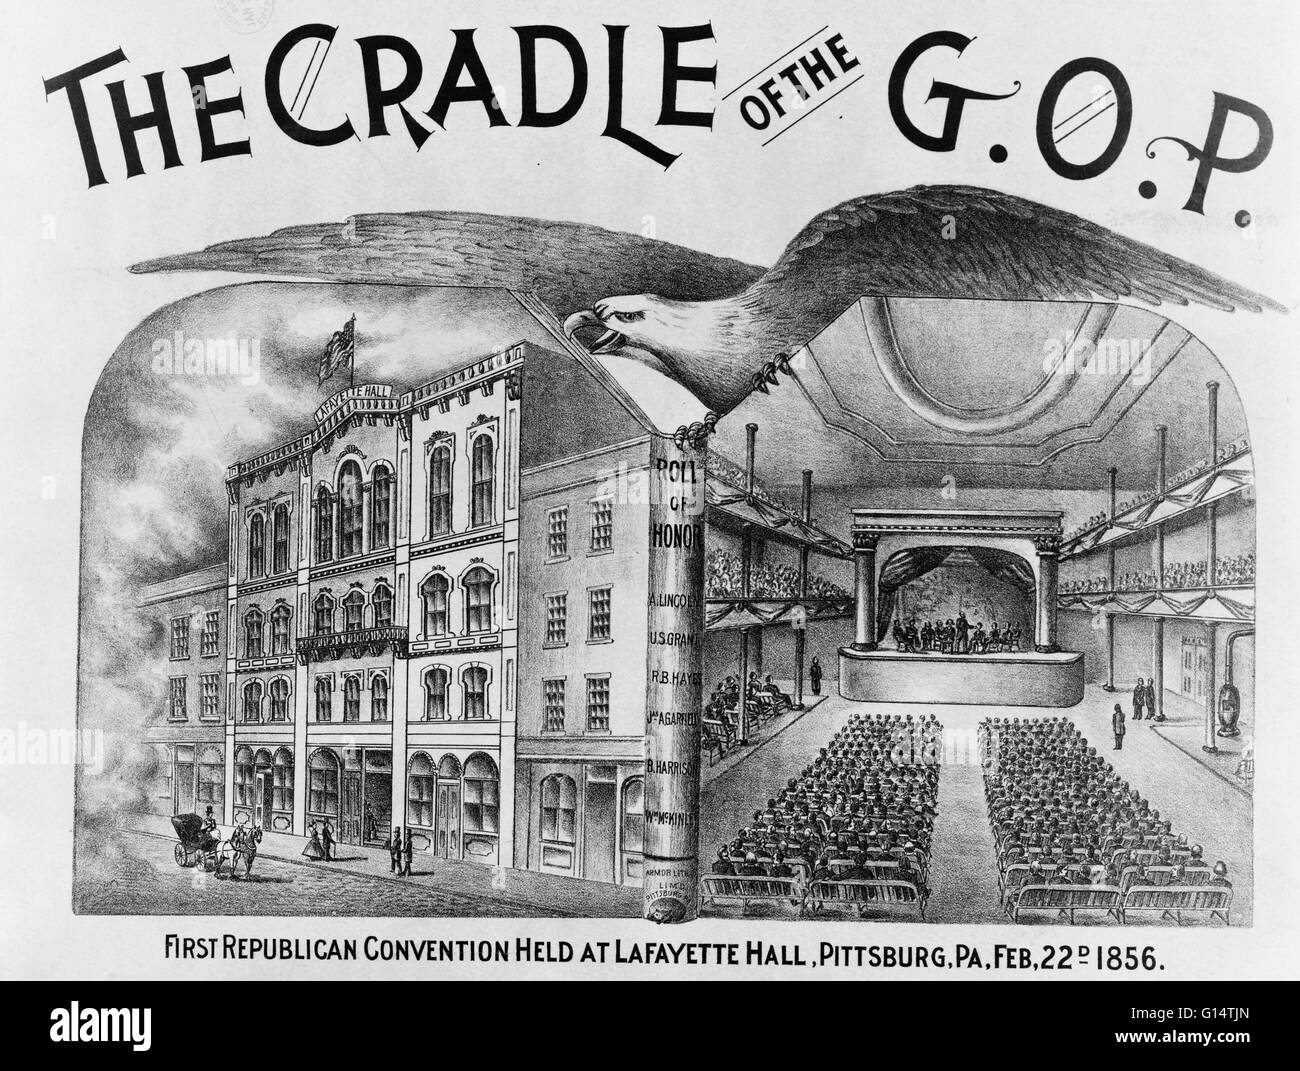 'The Cradle of the GOP,' illustrating the first Republican convention held at LaFayette Hall, Pittsburgh, PA, Feb. 22nd 1856. The print shows exterior and interior views of the hall. The Grand Old Party (GOP) was founded by anti-slavery expansion activist Stock Photo